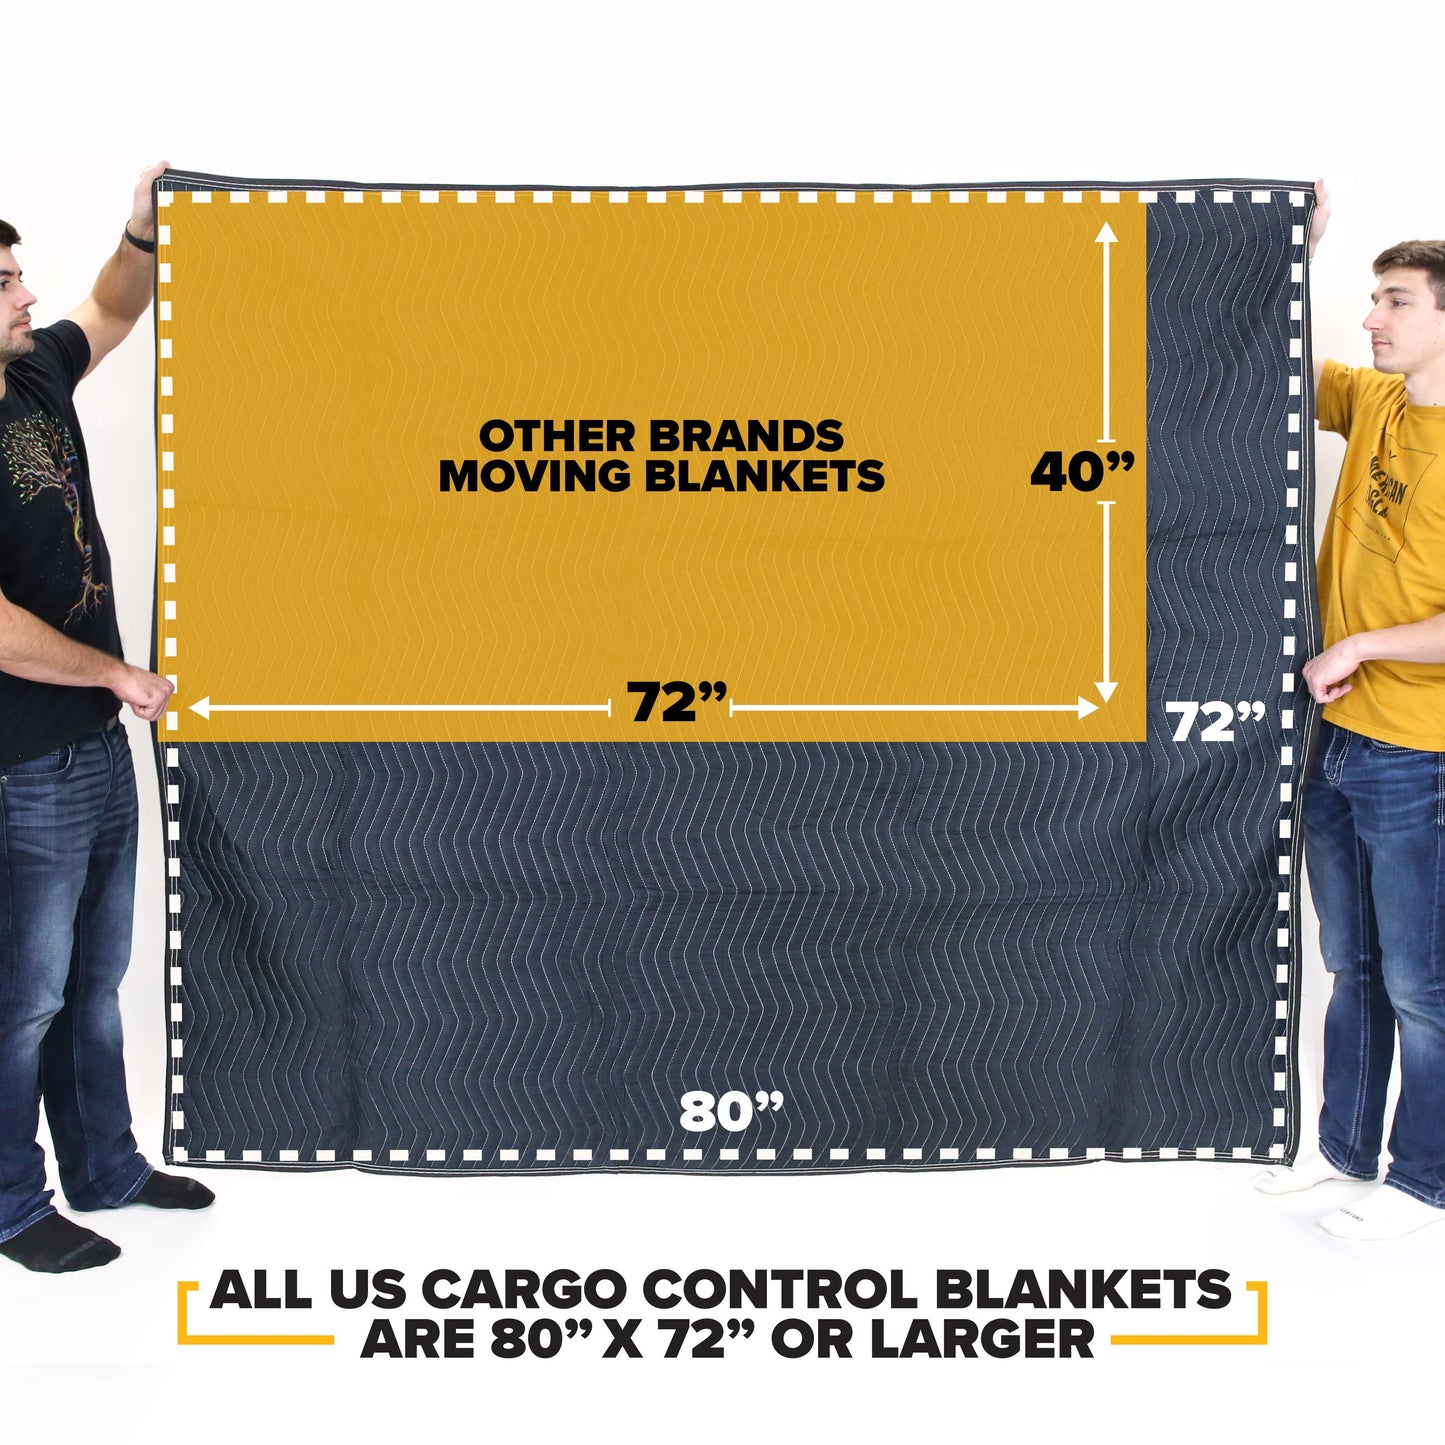 Moving Blankets- Pro Mover 4-Pack image 4 of 11